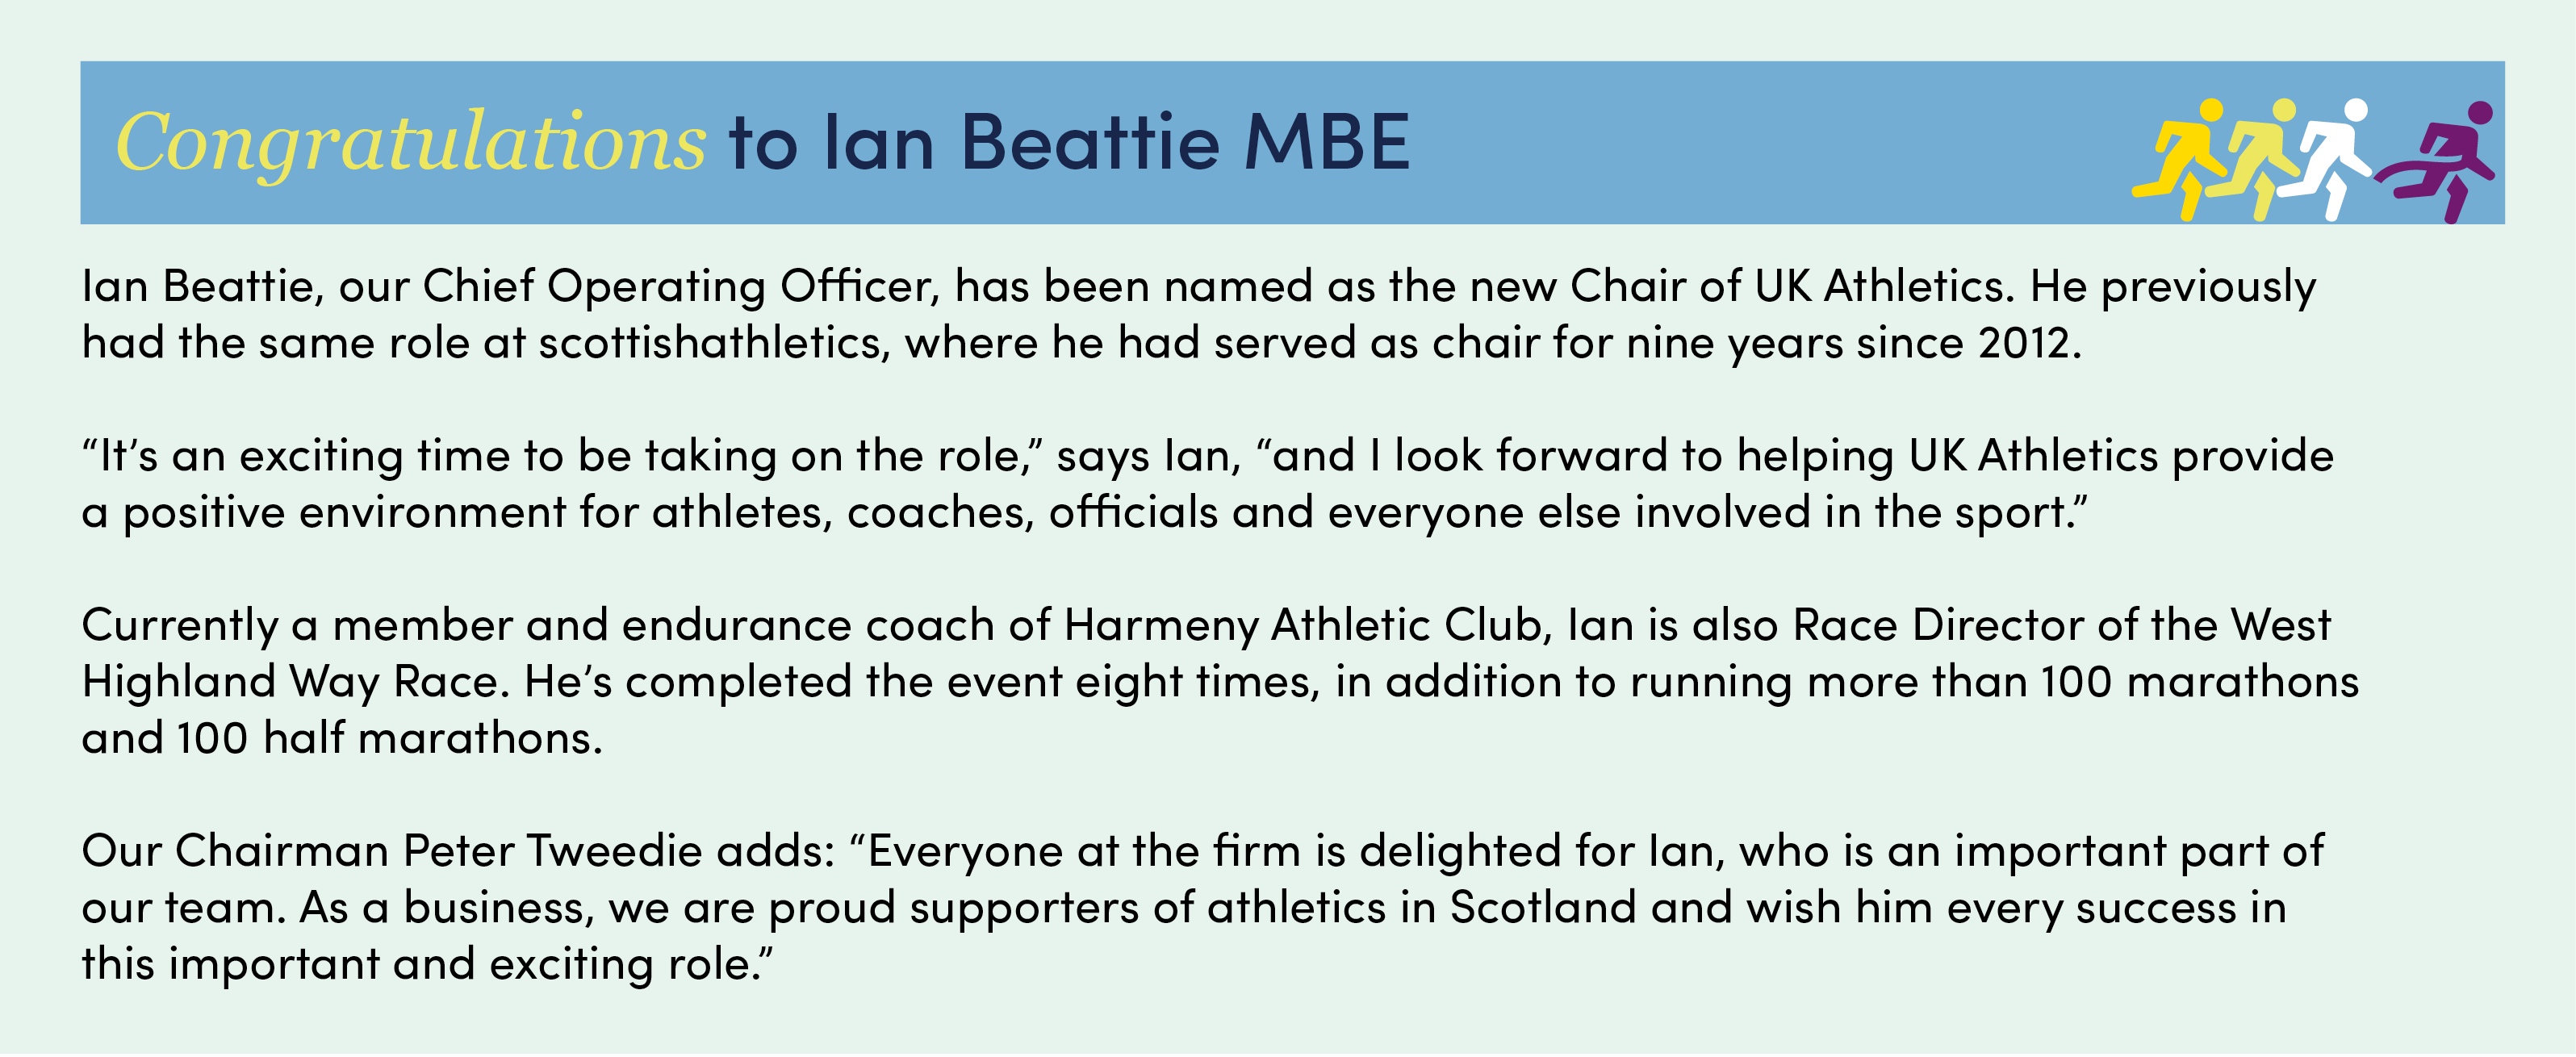 Congratulations-to-Ian-Beattie-MBE.png#asset:15154